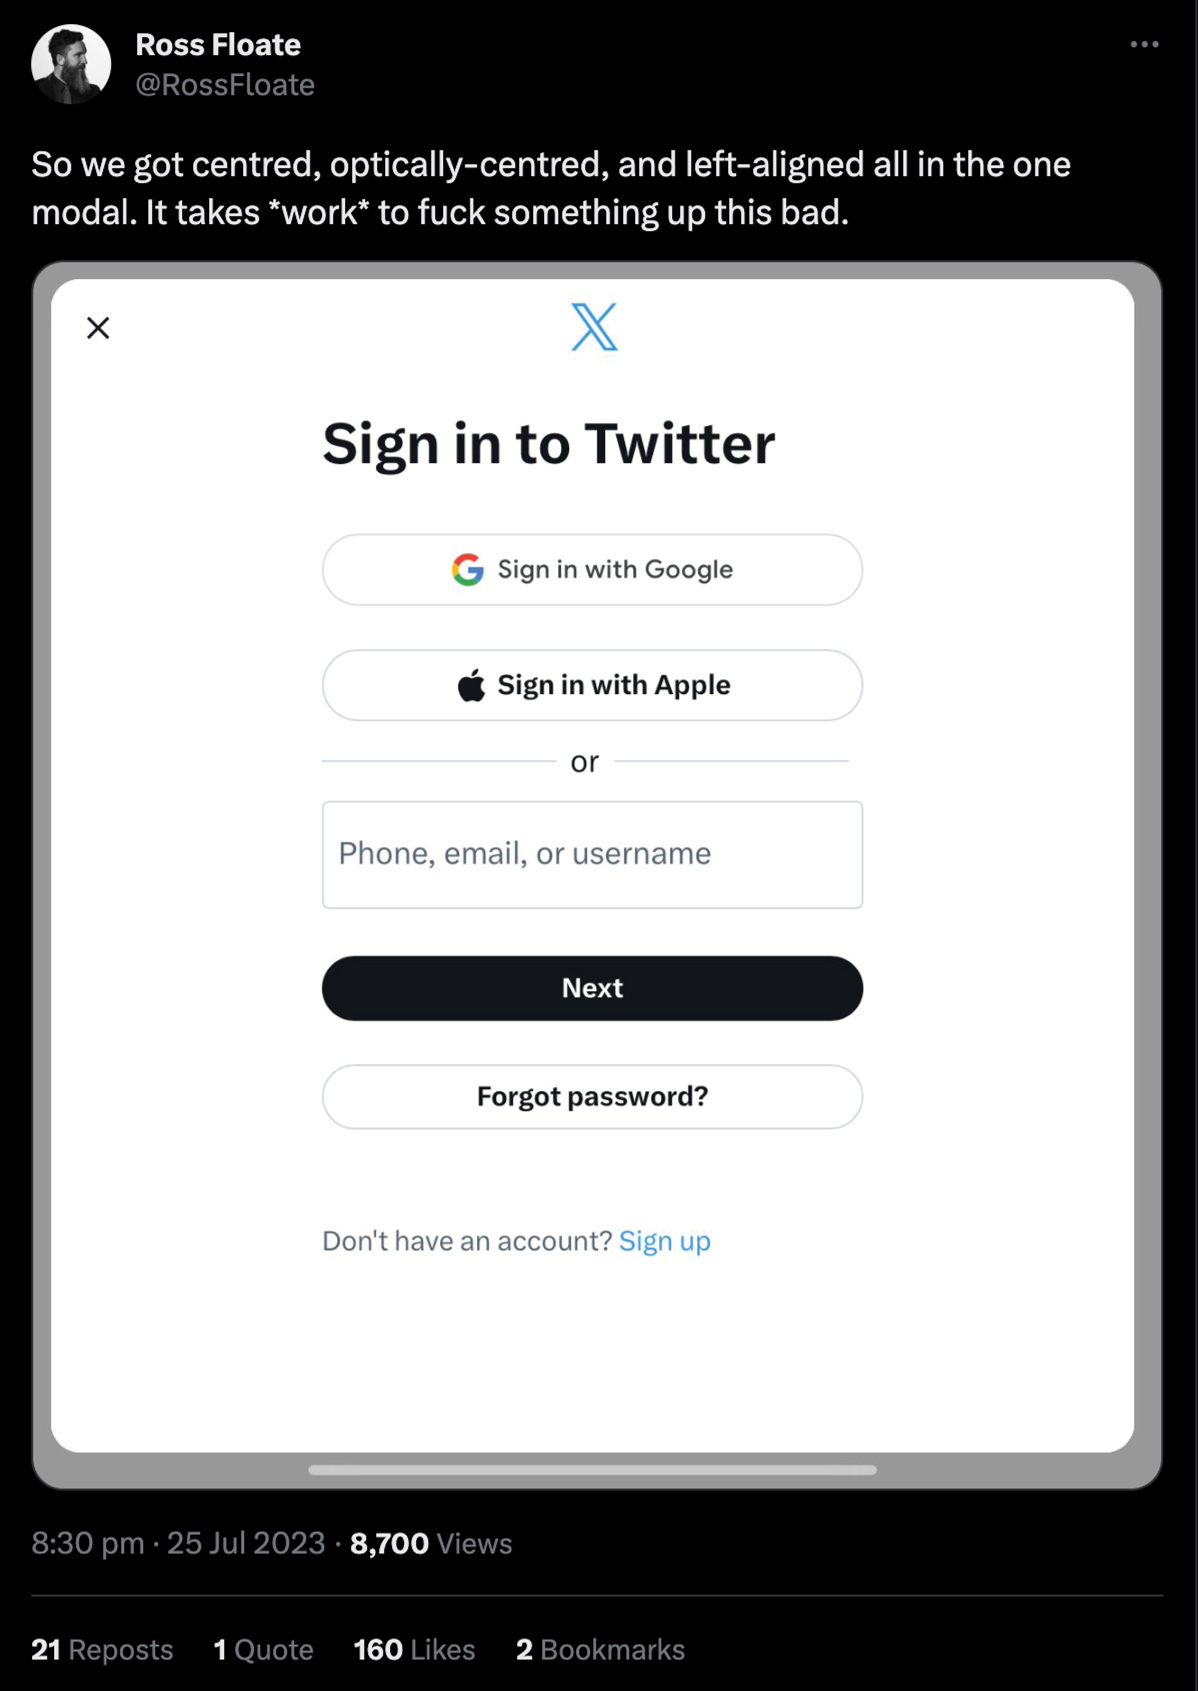 Tweet from @RossFloate with the caption 'So we got centred, optically-centred, and left-aligned all in the one modal. It takes *work* to fuck something up this bad.' and a screenshot of the sign in page of Twitter/X